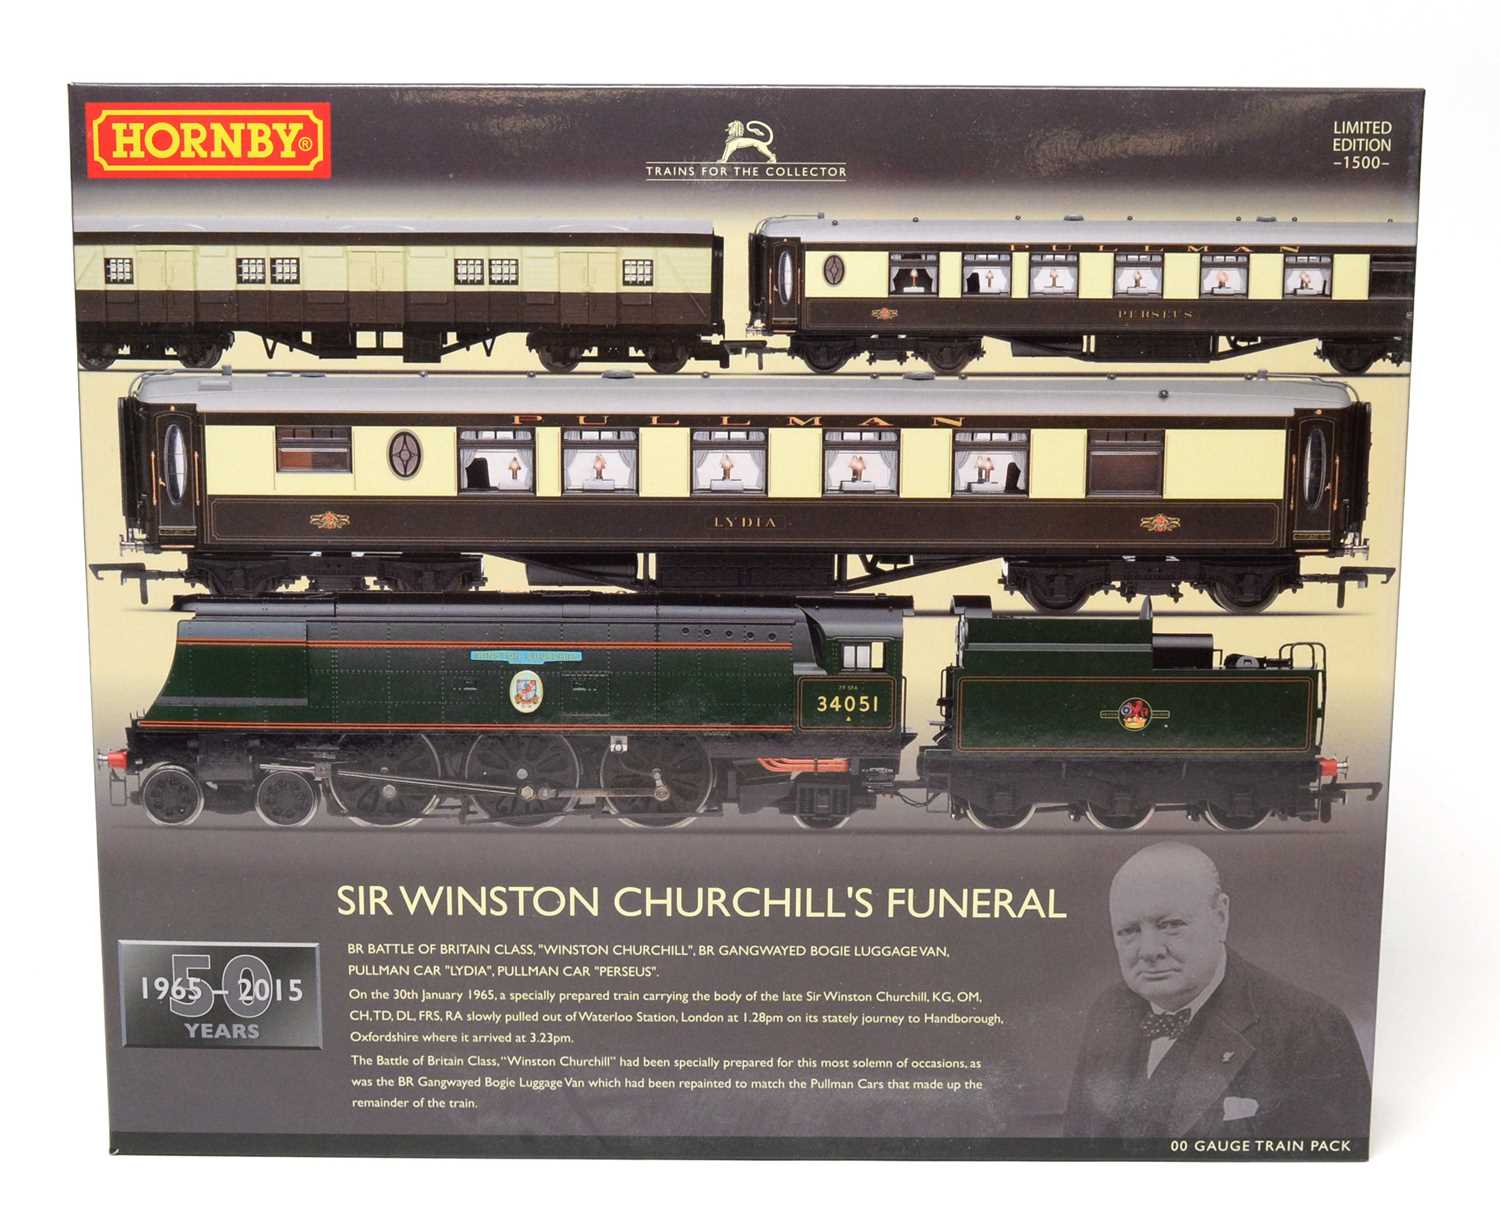 Lot 656 - A Hornby Limited Edition of 1500 00-gauge train pack.